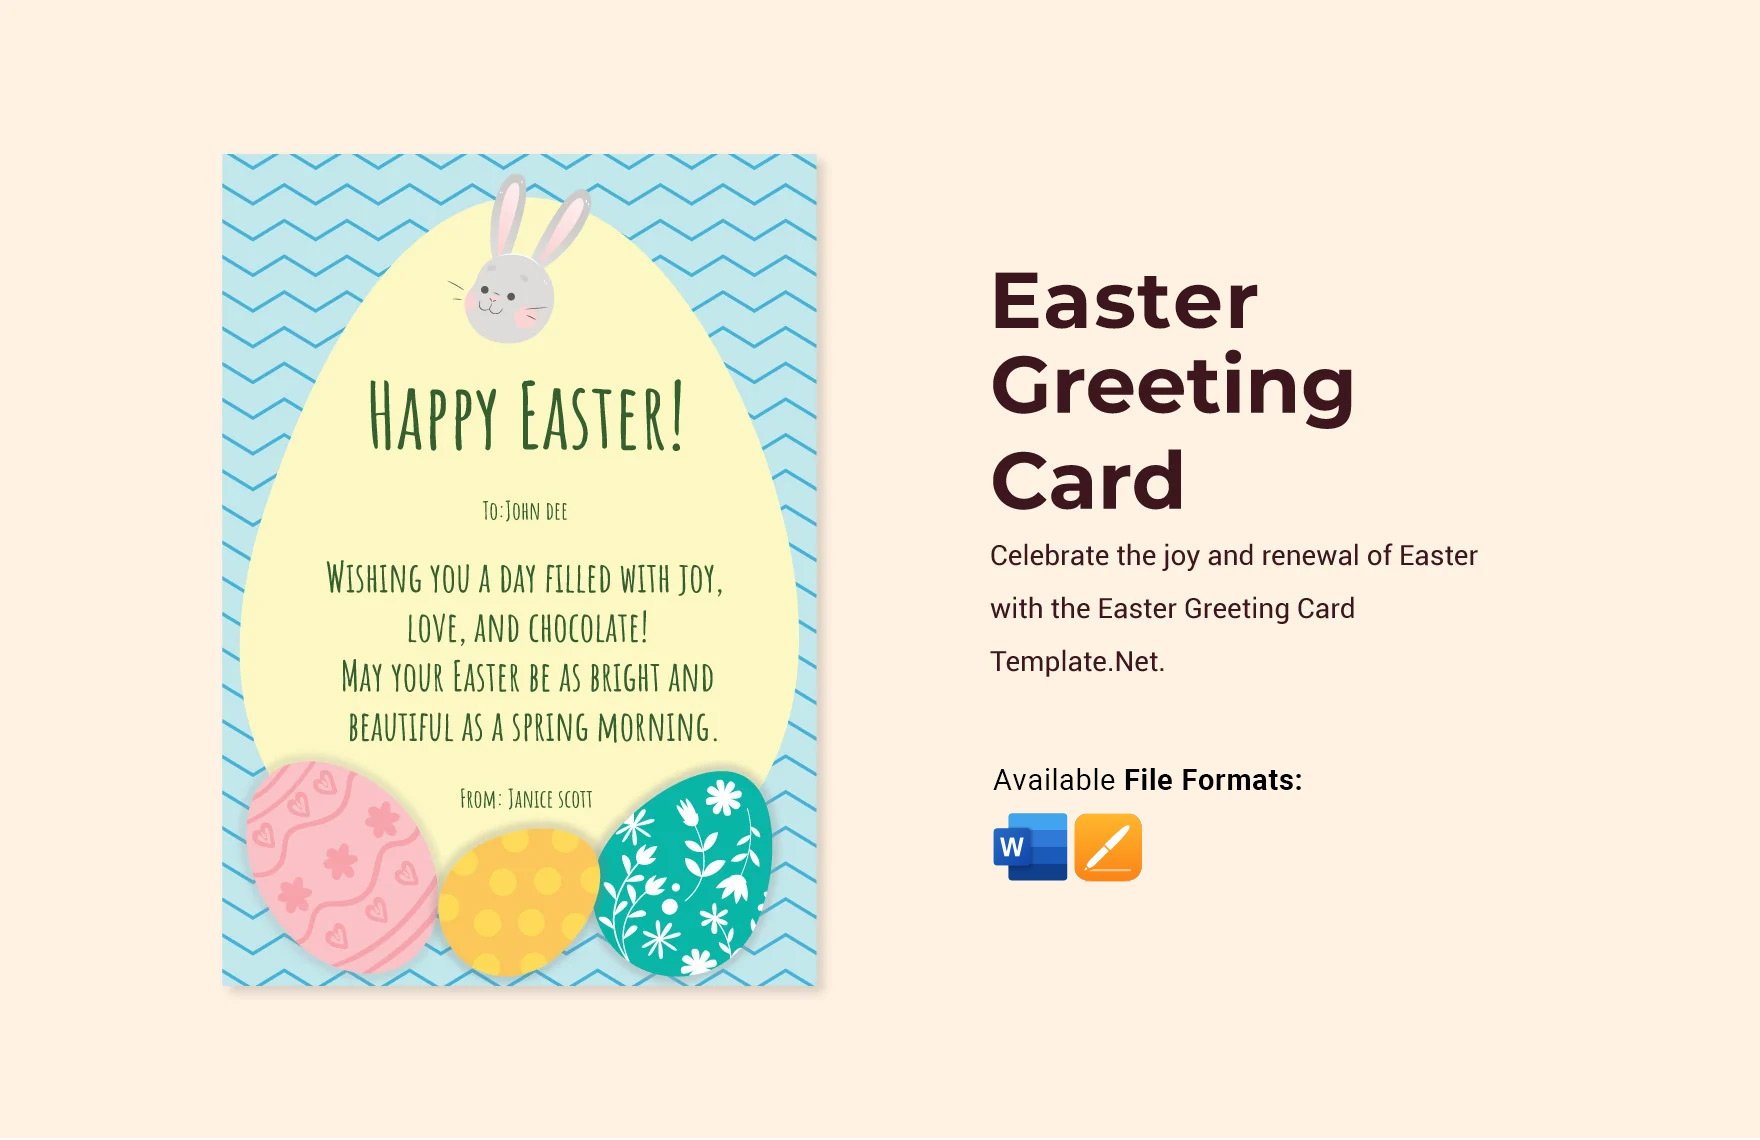 Easter Greeting Card Template in Word, Apple Pages